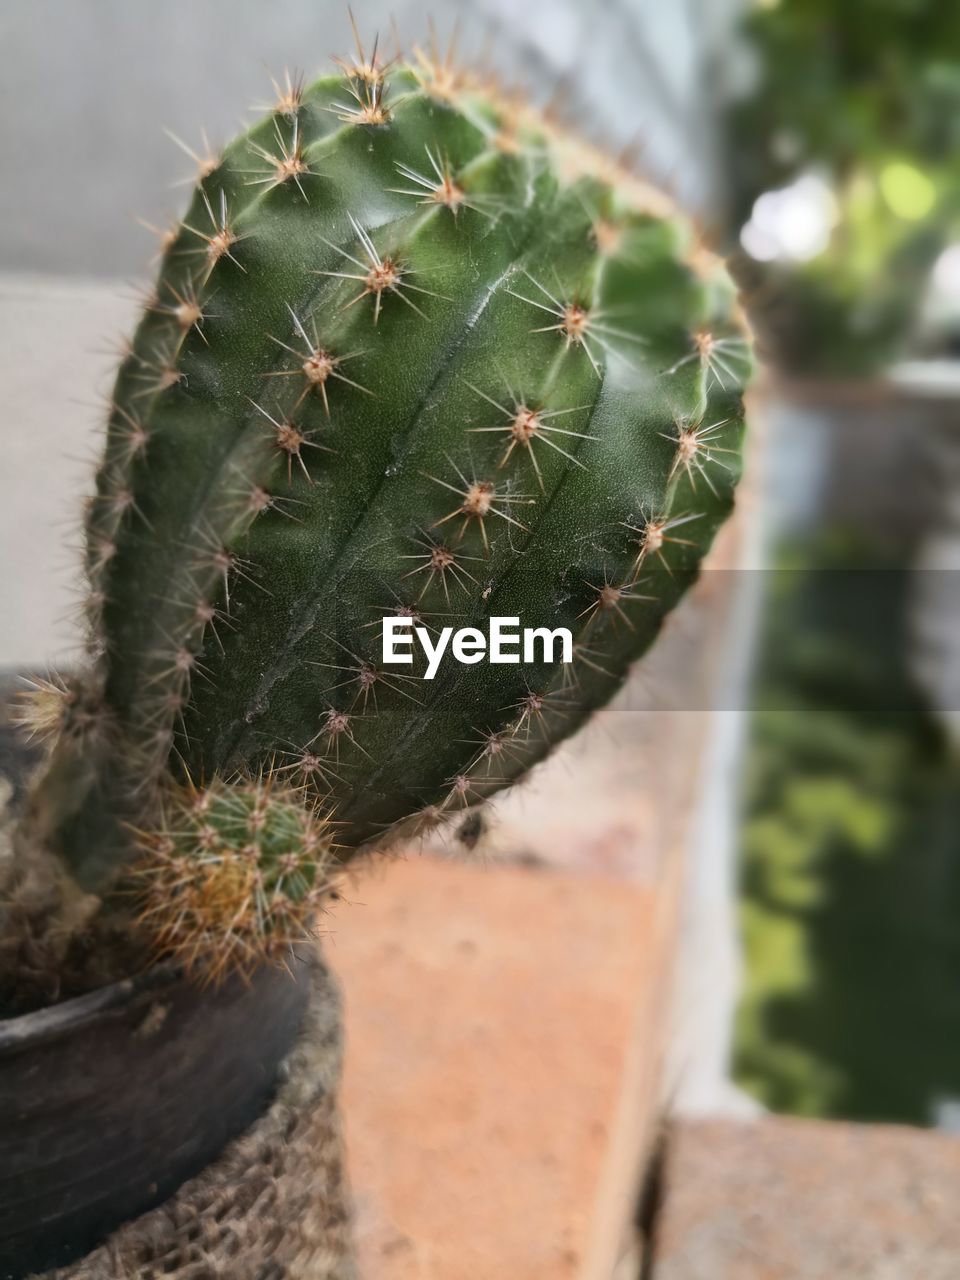 CLOSE-UP OF CACTUS PLANT WITH TEXT